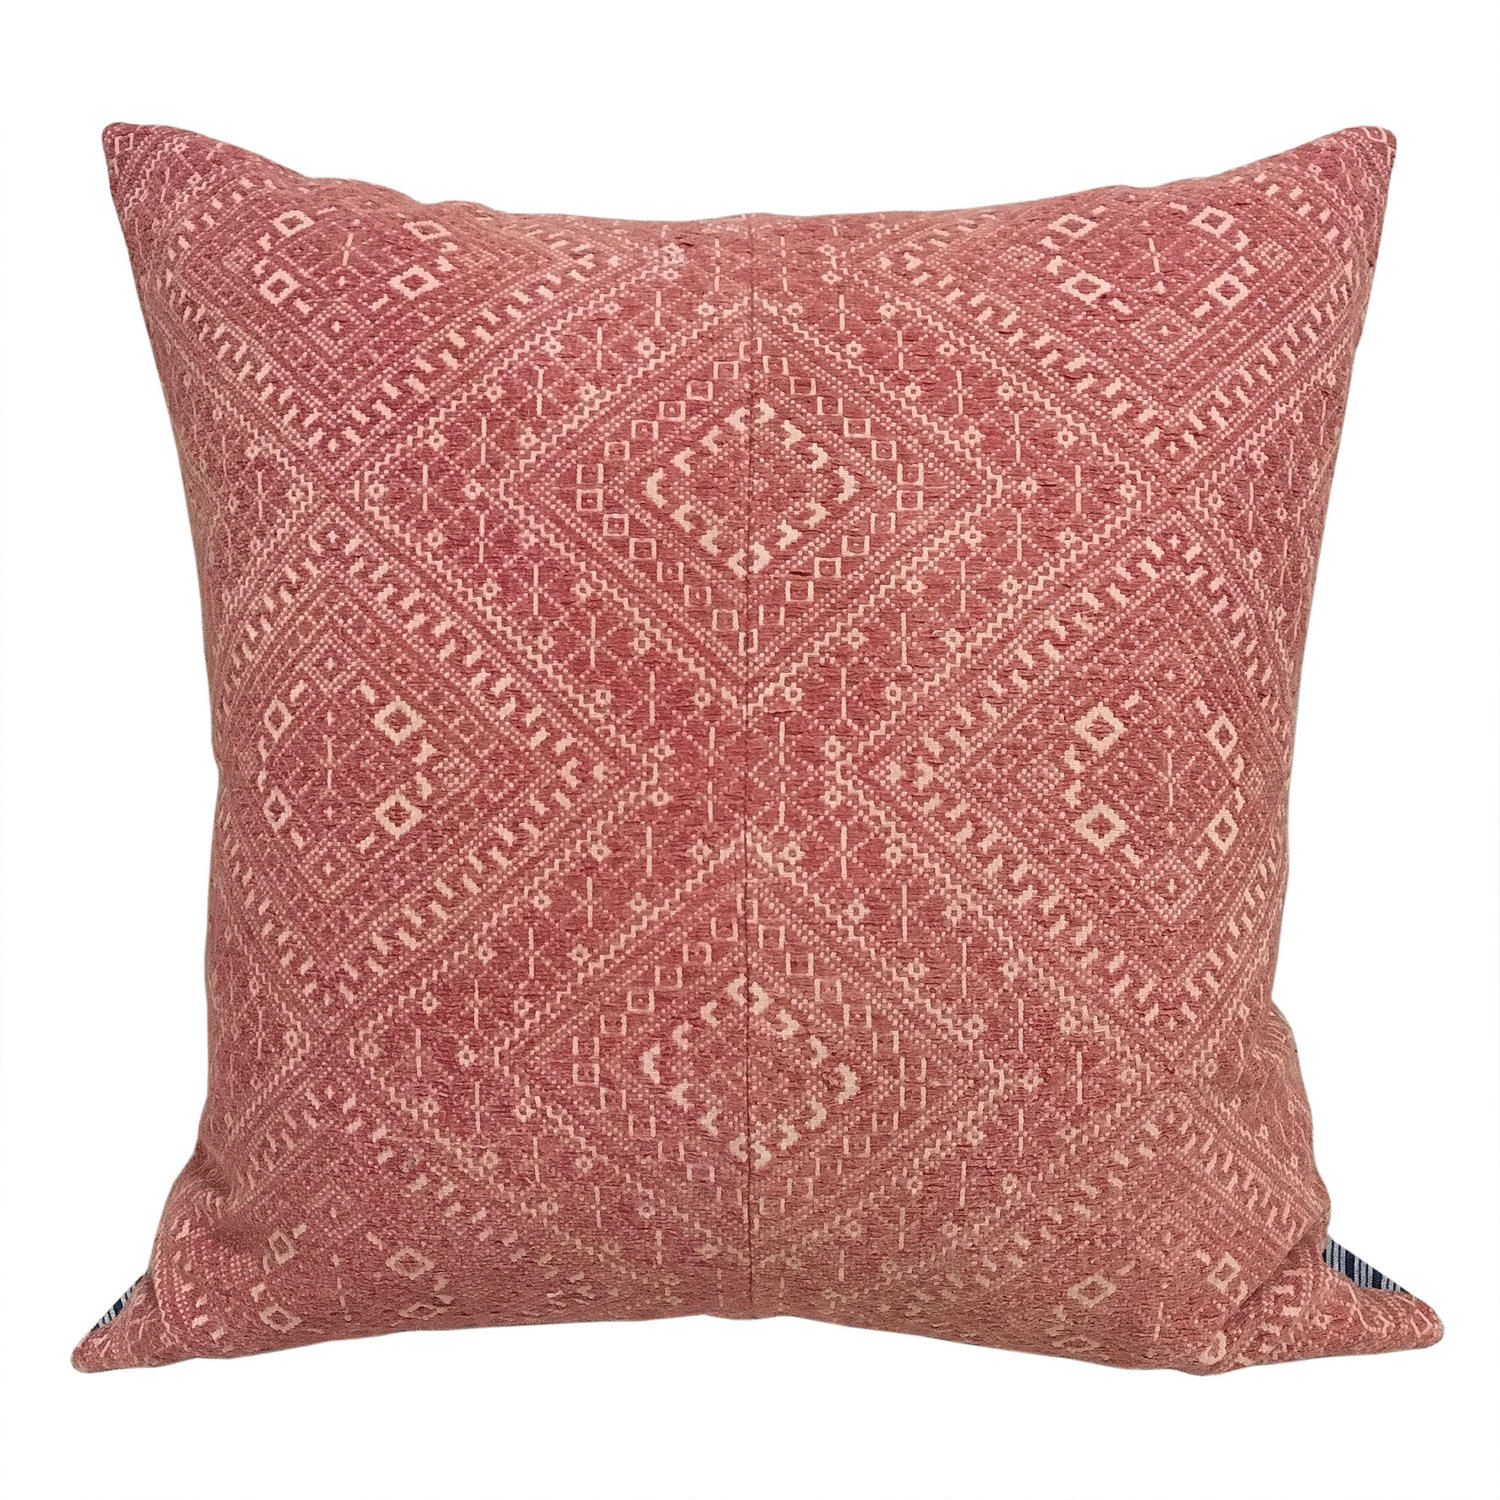 Large Red Dai Wdding Blanket Cushions